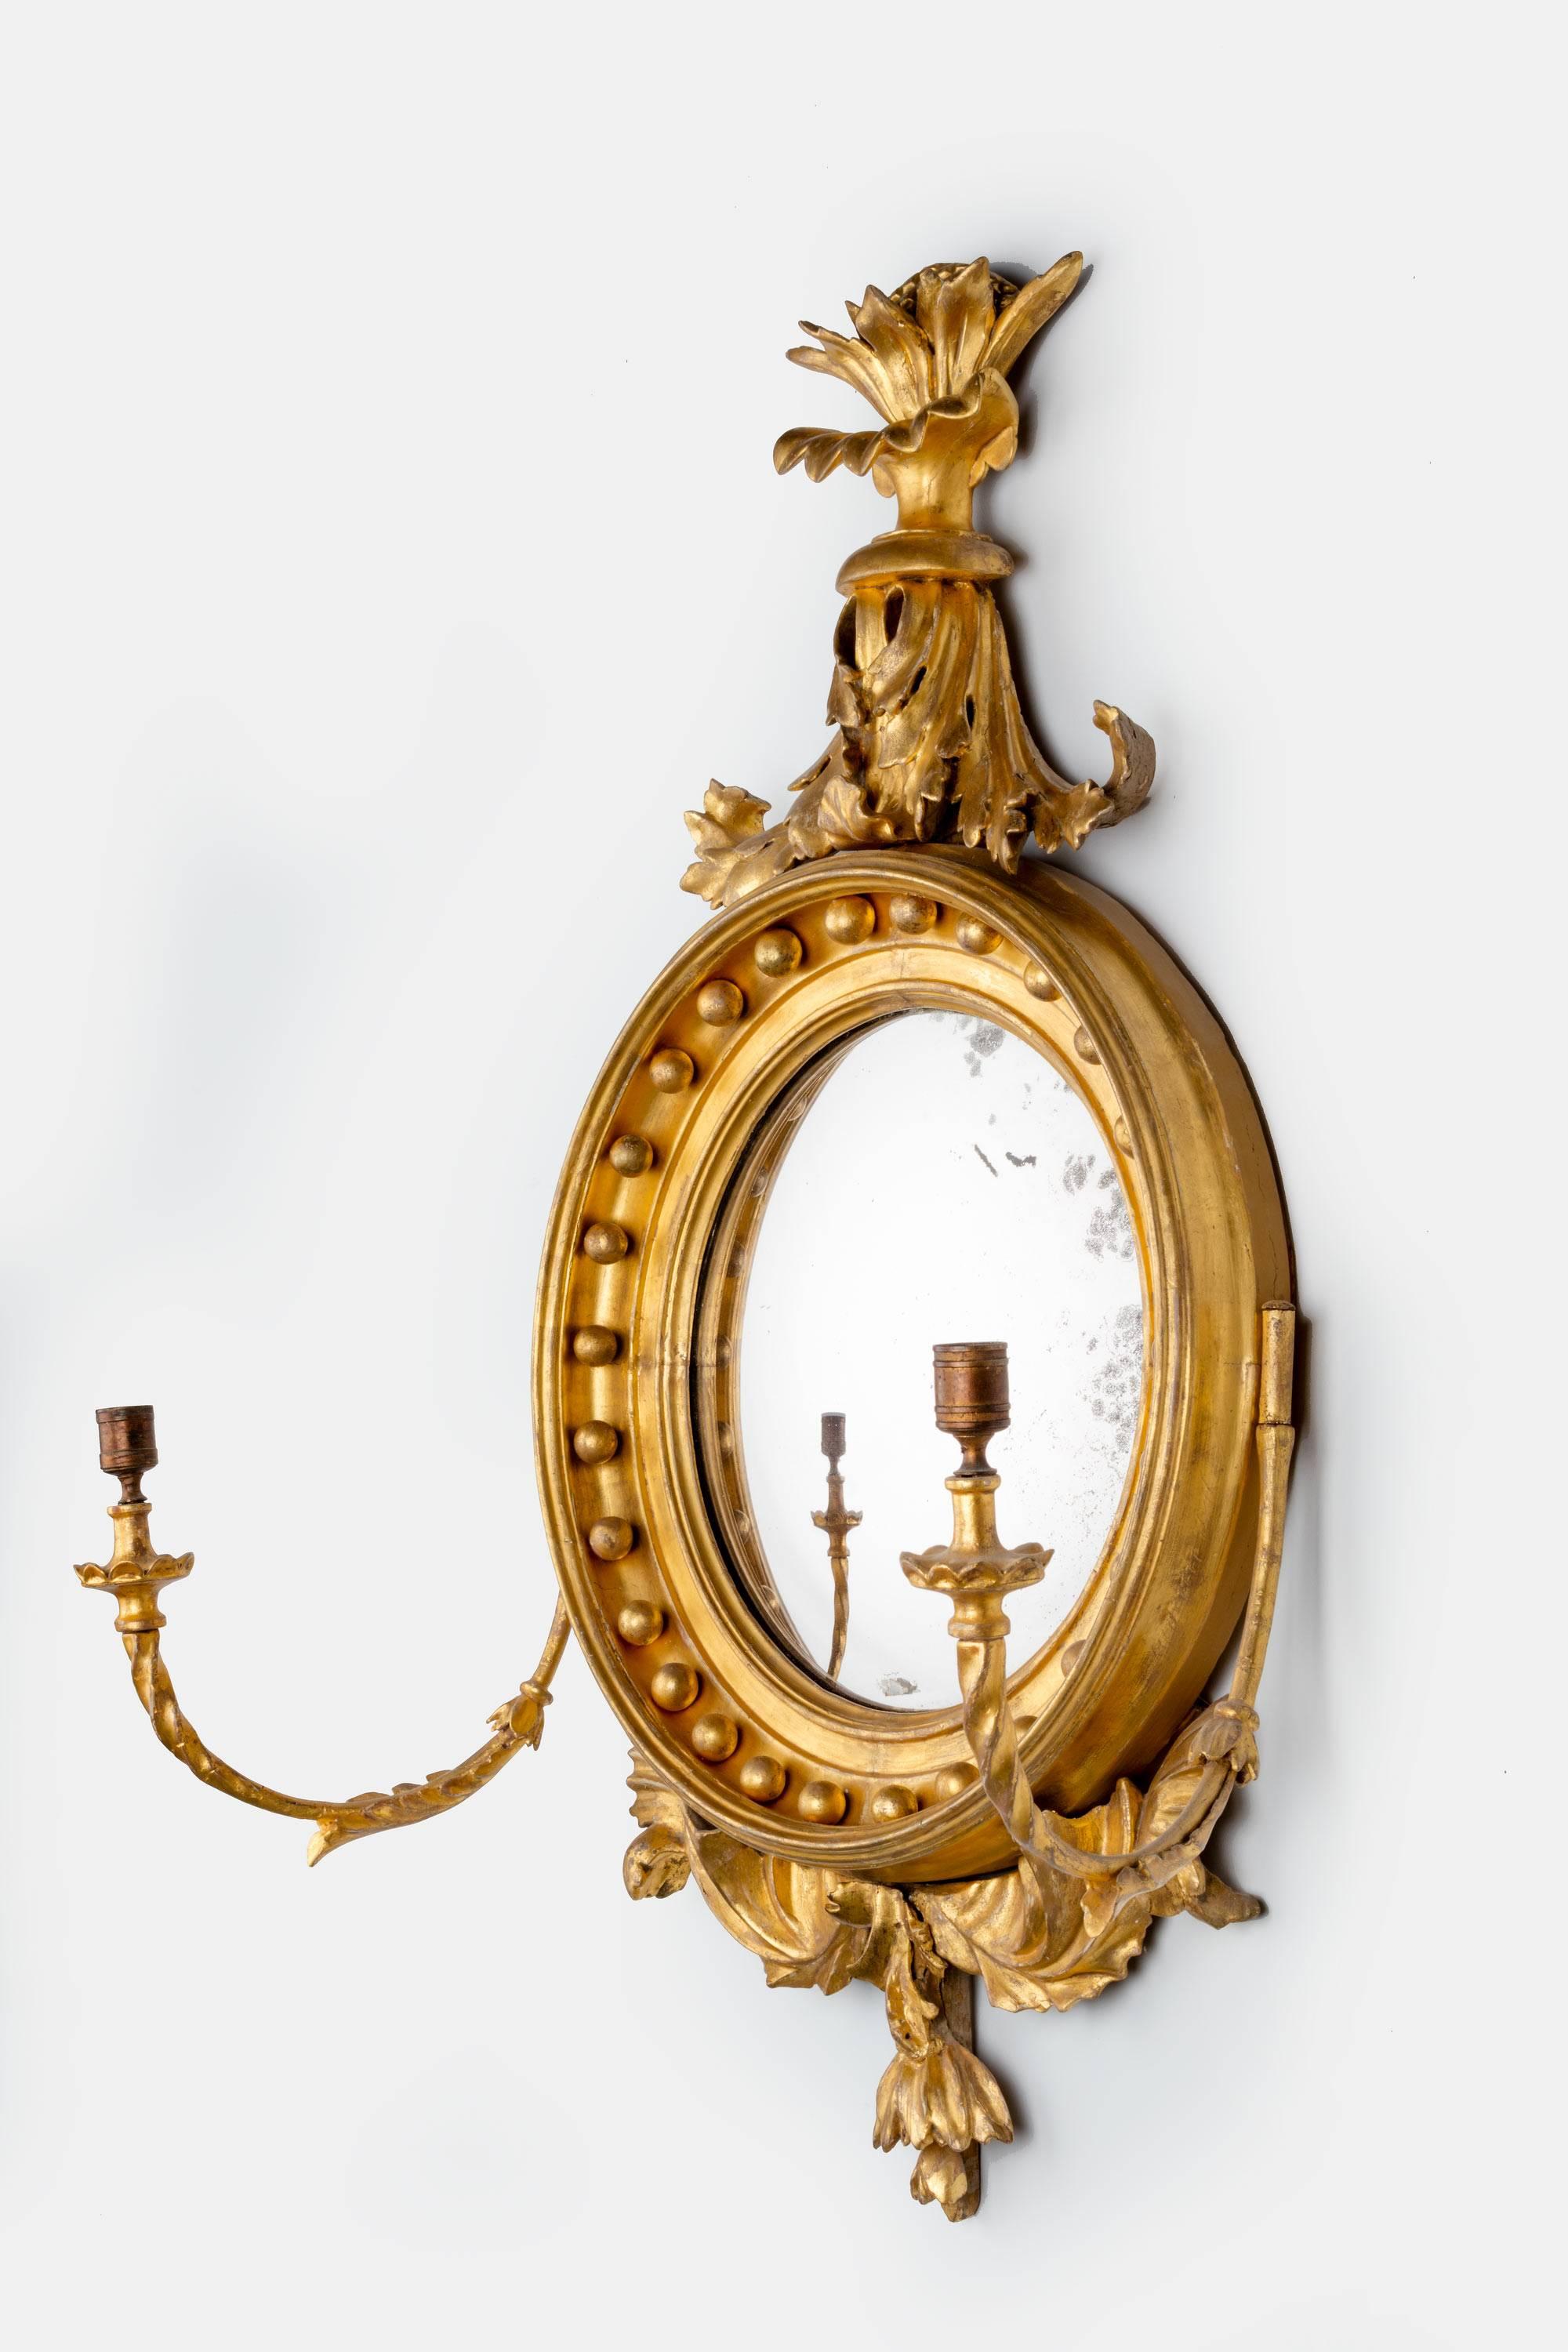 Regency Period Giltwood Convex Mirror In Excellent Condition For Sale In Peterborough, Northamptonshire